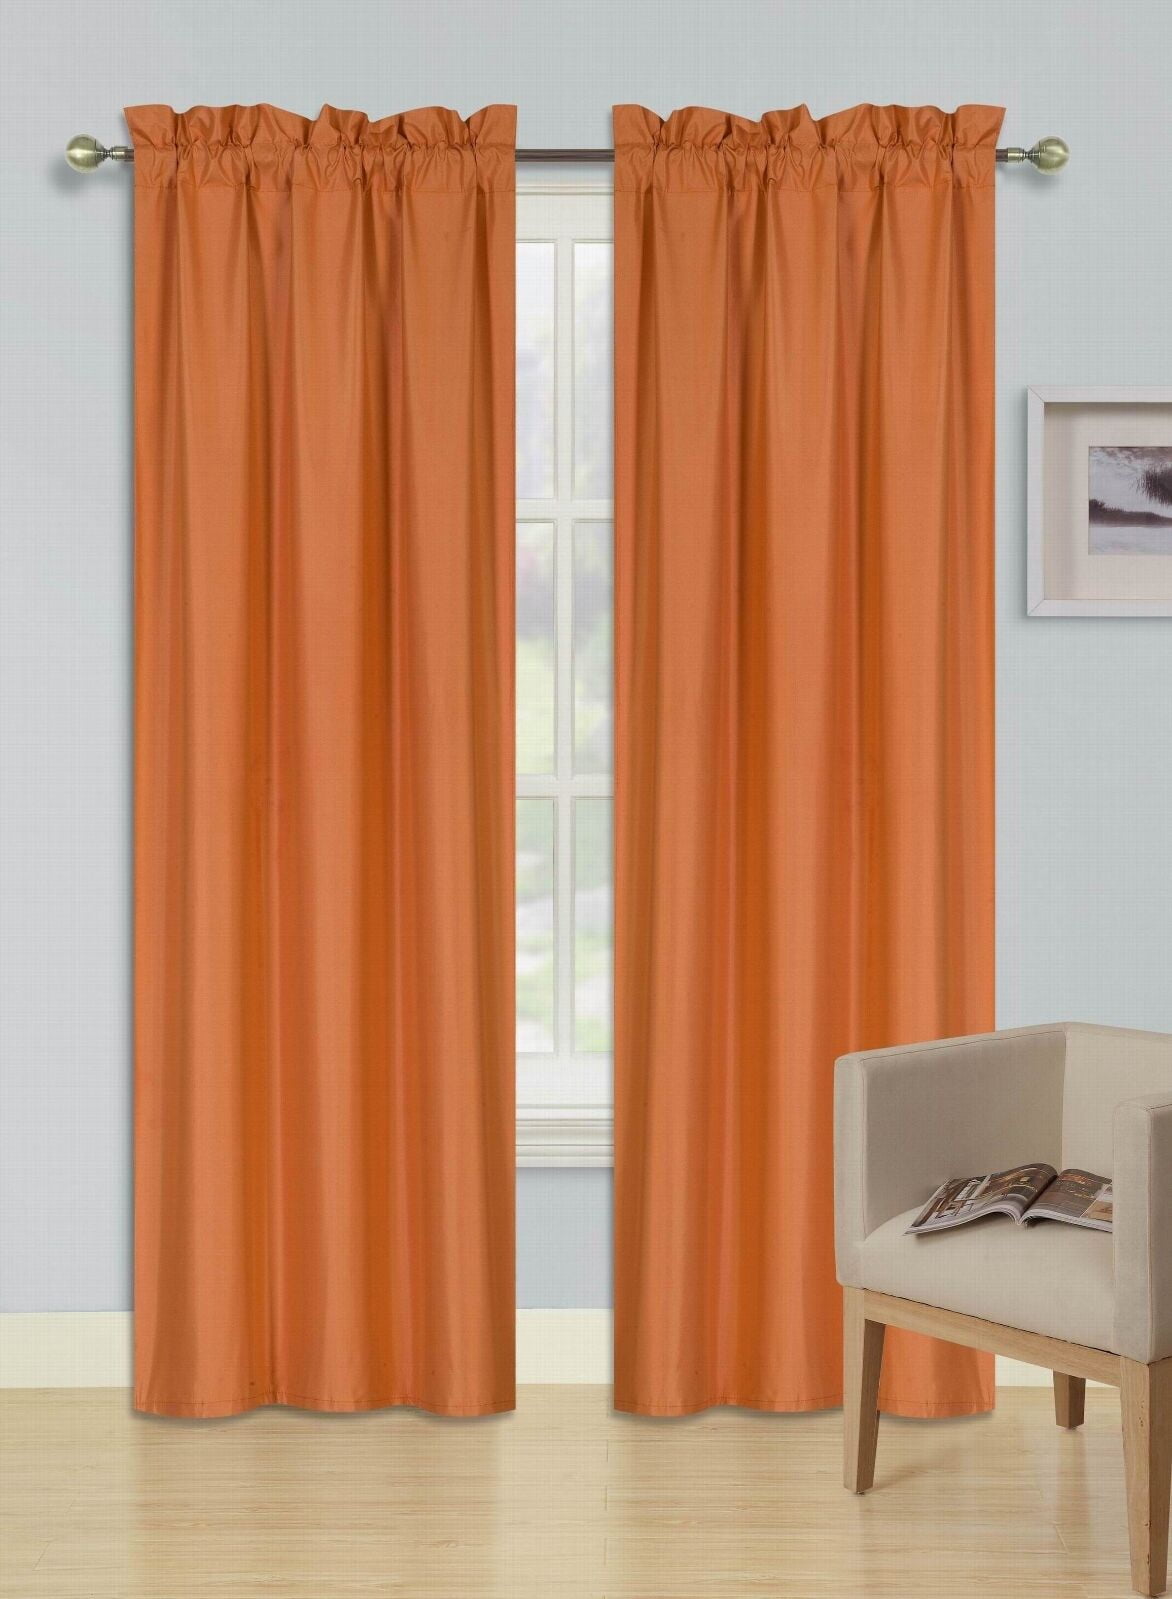 1 Set Rod Pocket Insulated Thermal Lined Blackout Window Curtain R64 Charcoal 